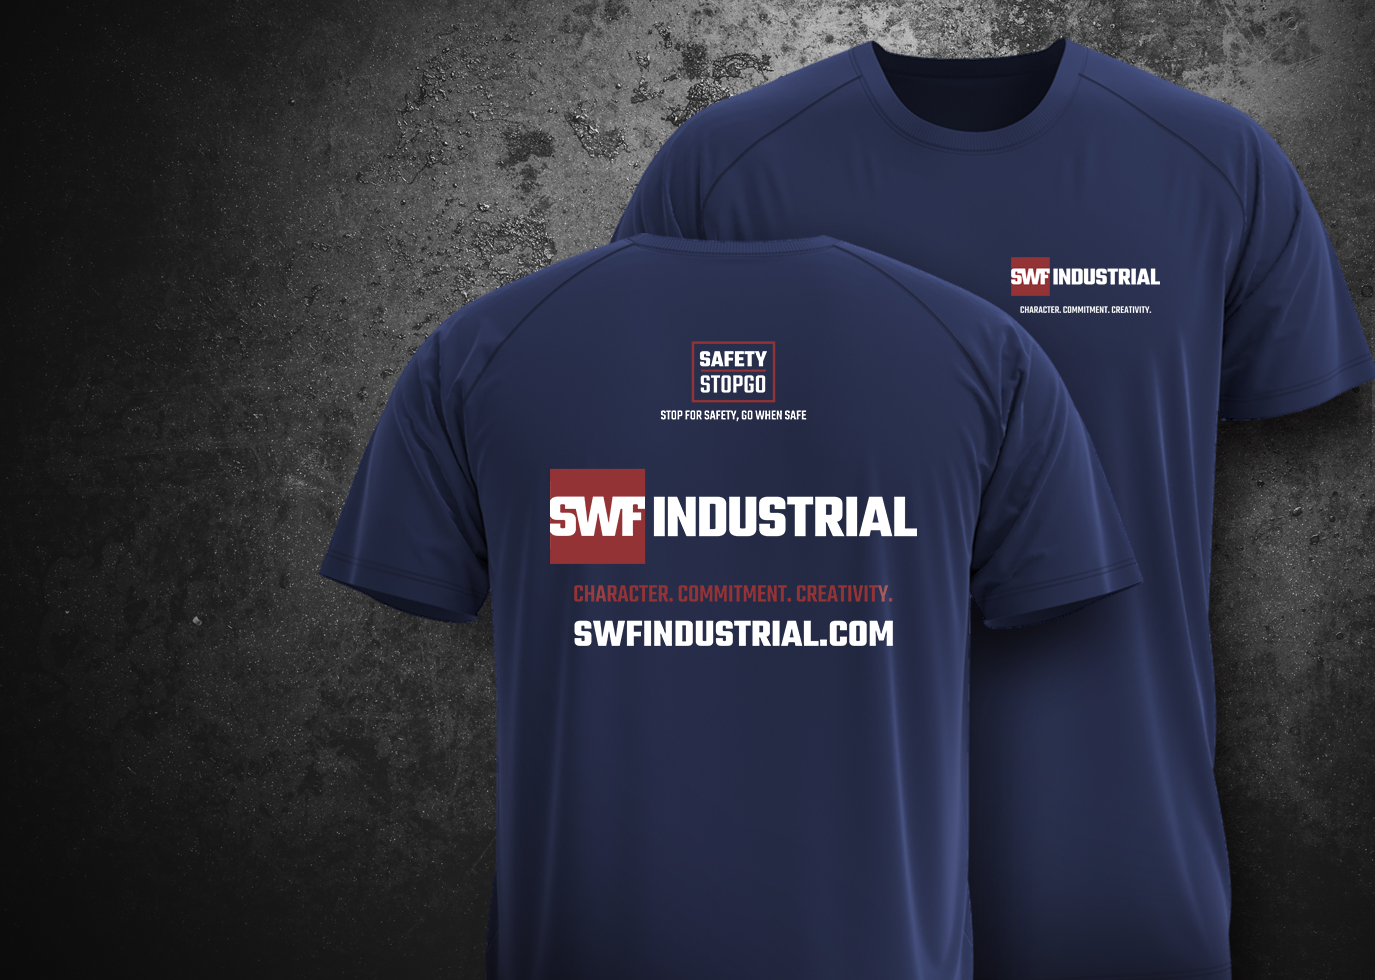 SWF Industrial Tee Shirt designs as created by Synapse Marketing in blue on grey marbled background with SWF logo